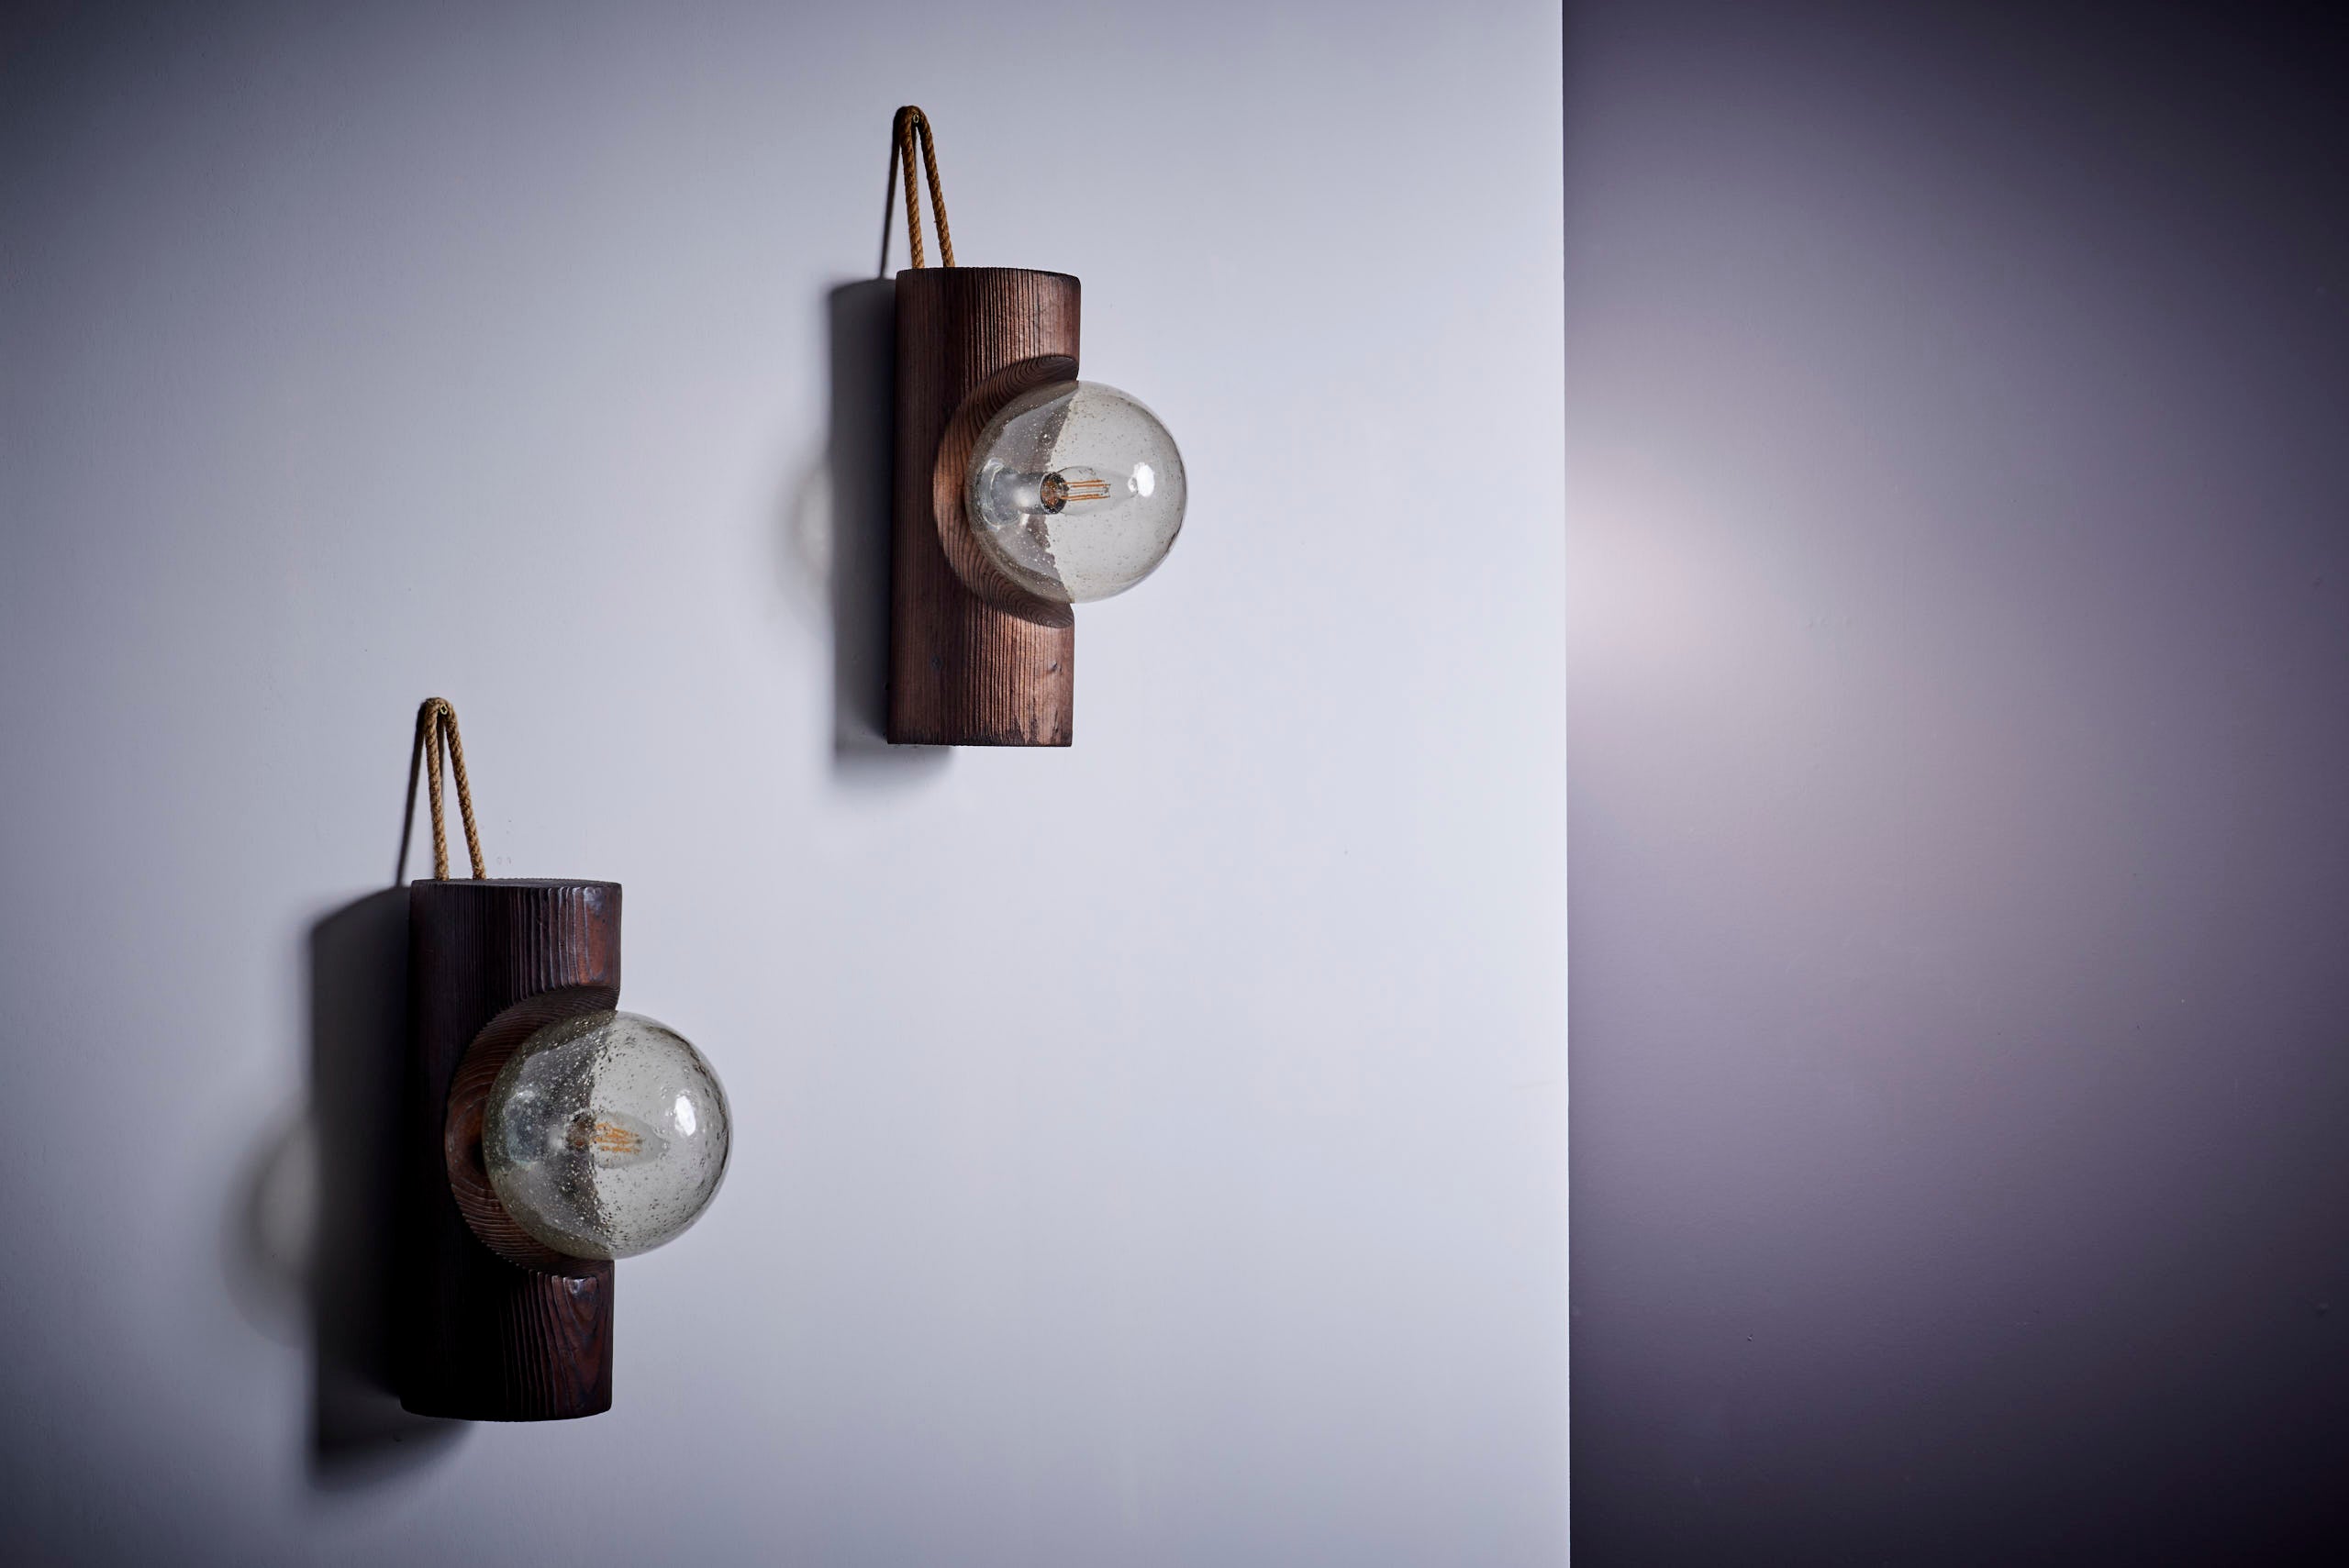 Temde Pair of Wall Lamps in Wood with Glass Bulbs.
1x E14 each.

Please note: Lamp should be fitted professionally in accordance to local requirements.